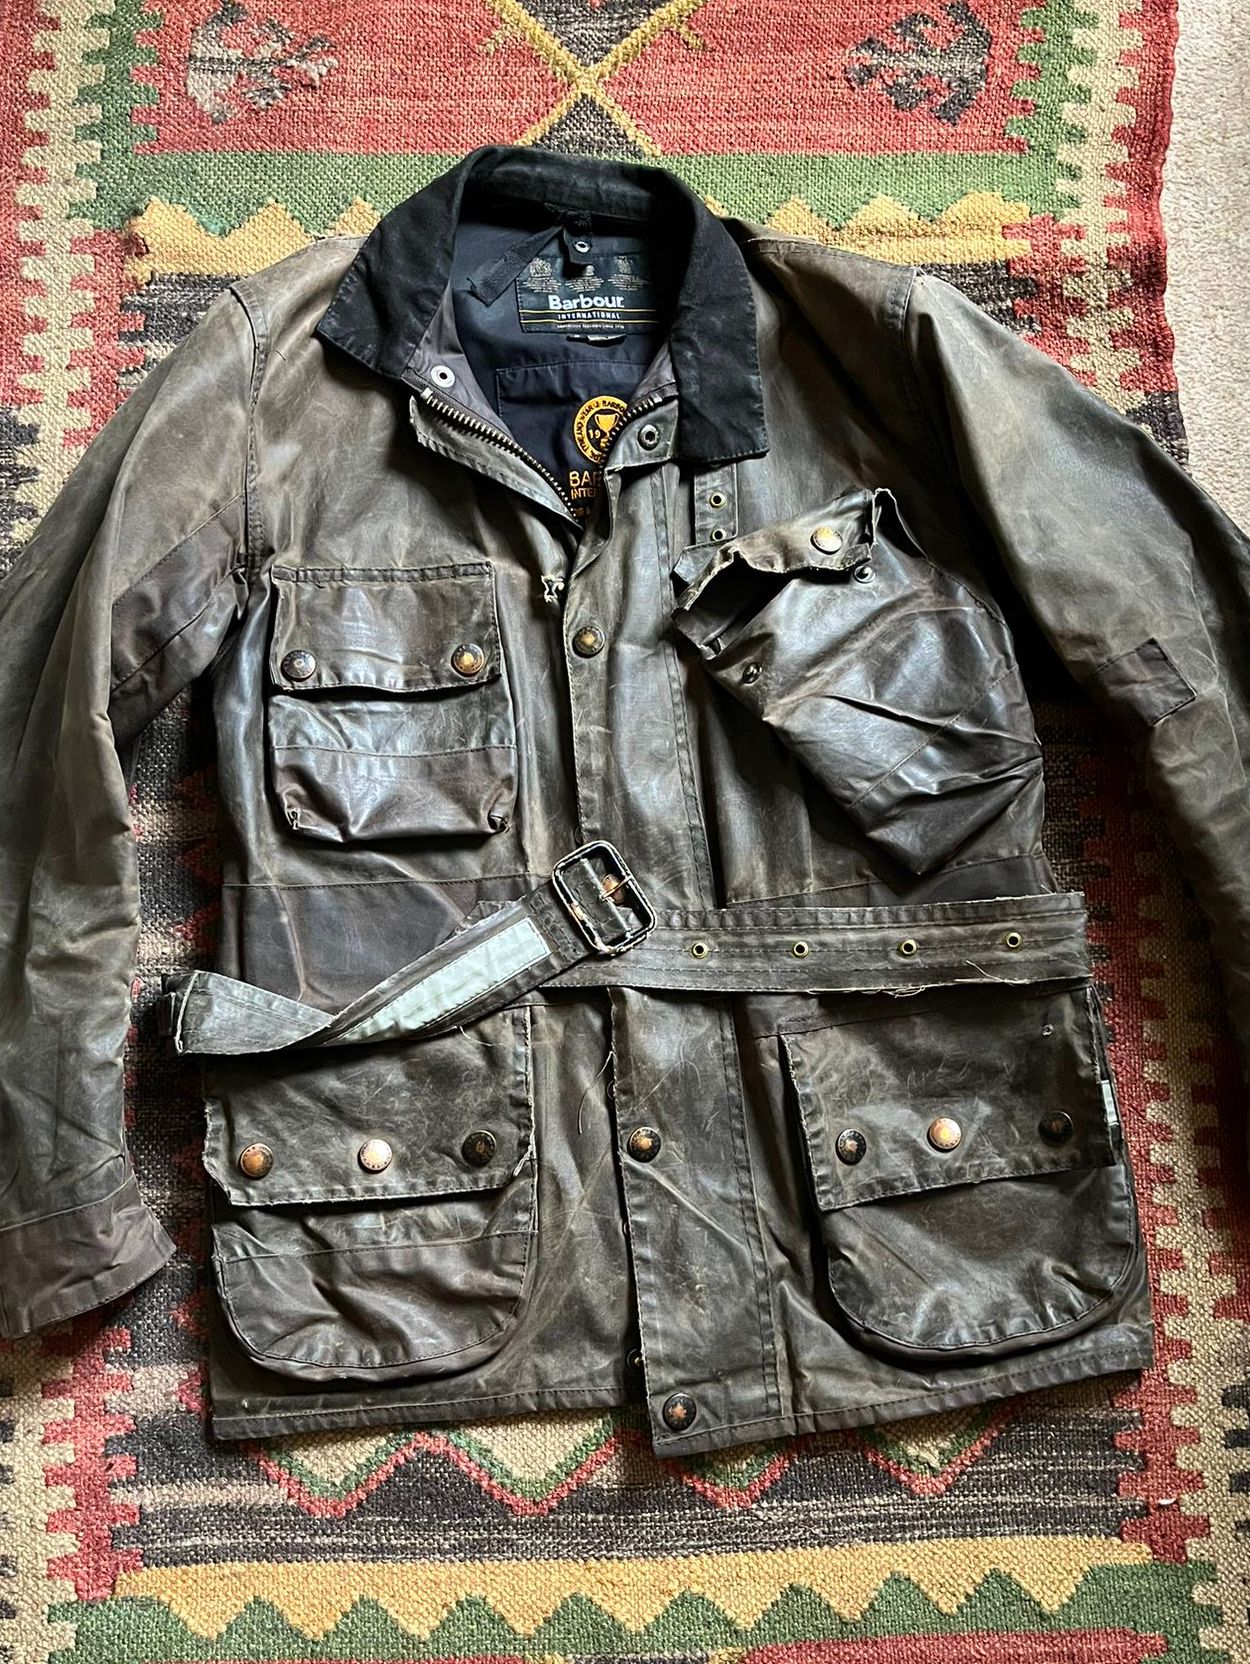 My battered Barbour: A rewaxing service to recommend – Permanent Style